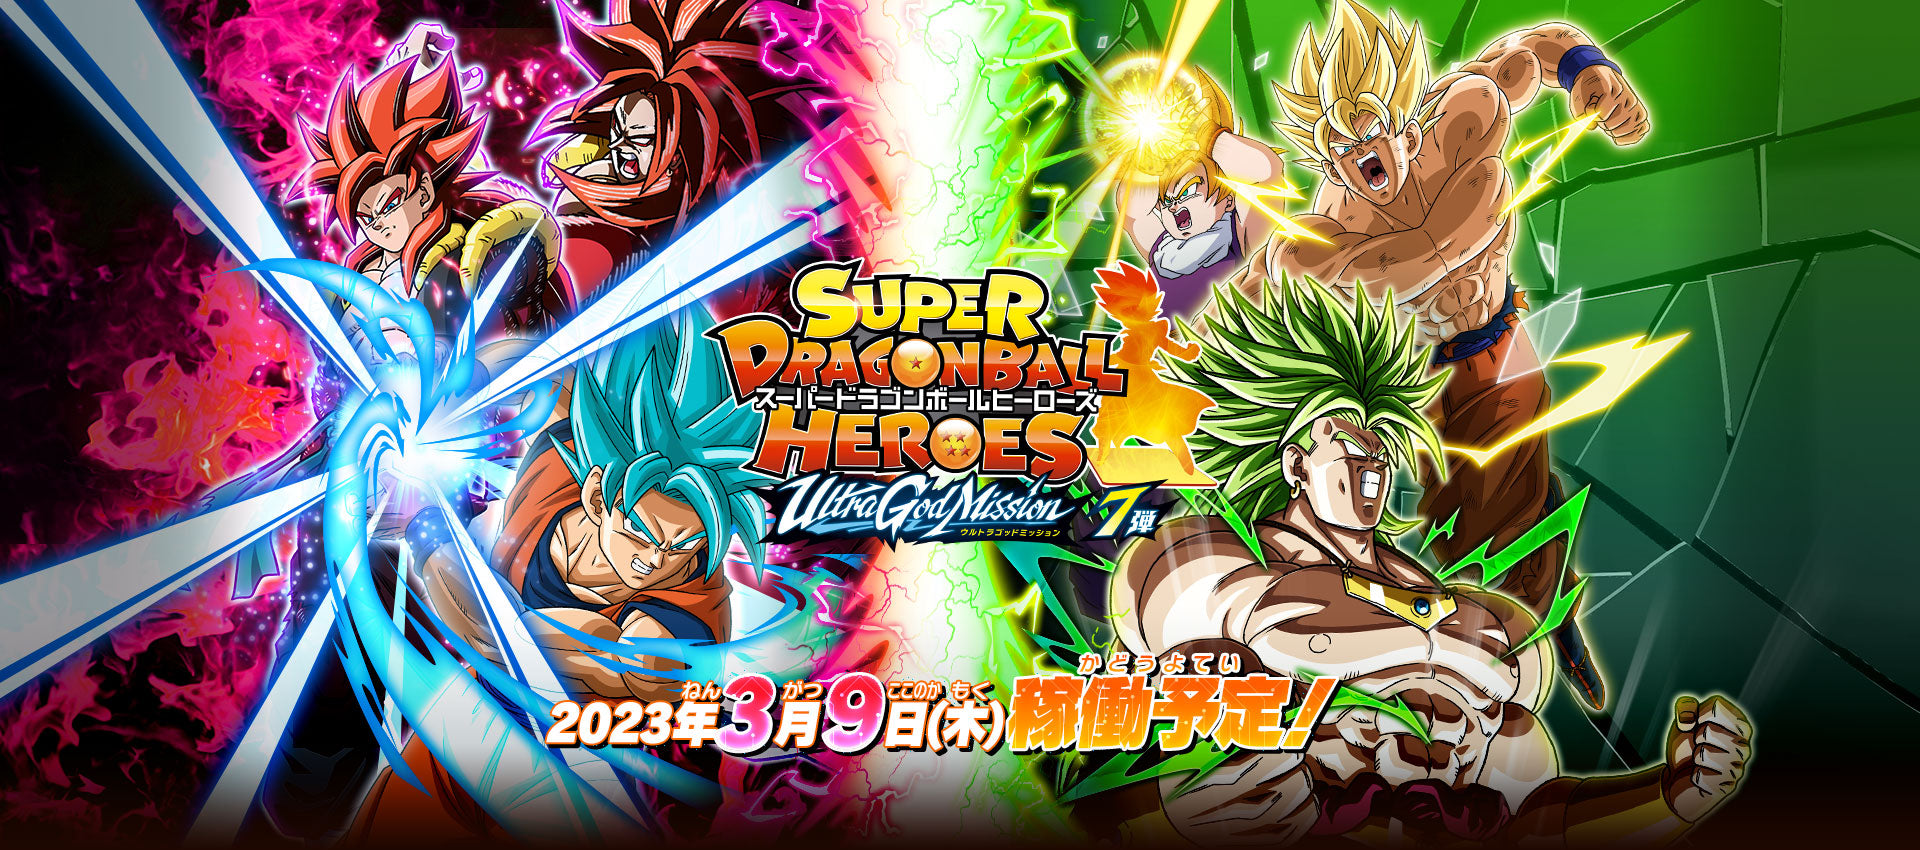 SUPER DRAGON BALL HEROES ULTRA GOD MISSION 7 (SDBH UGM7) cards list